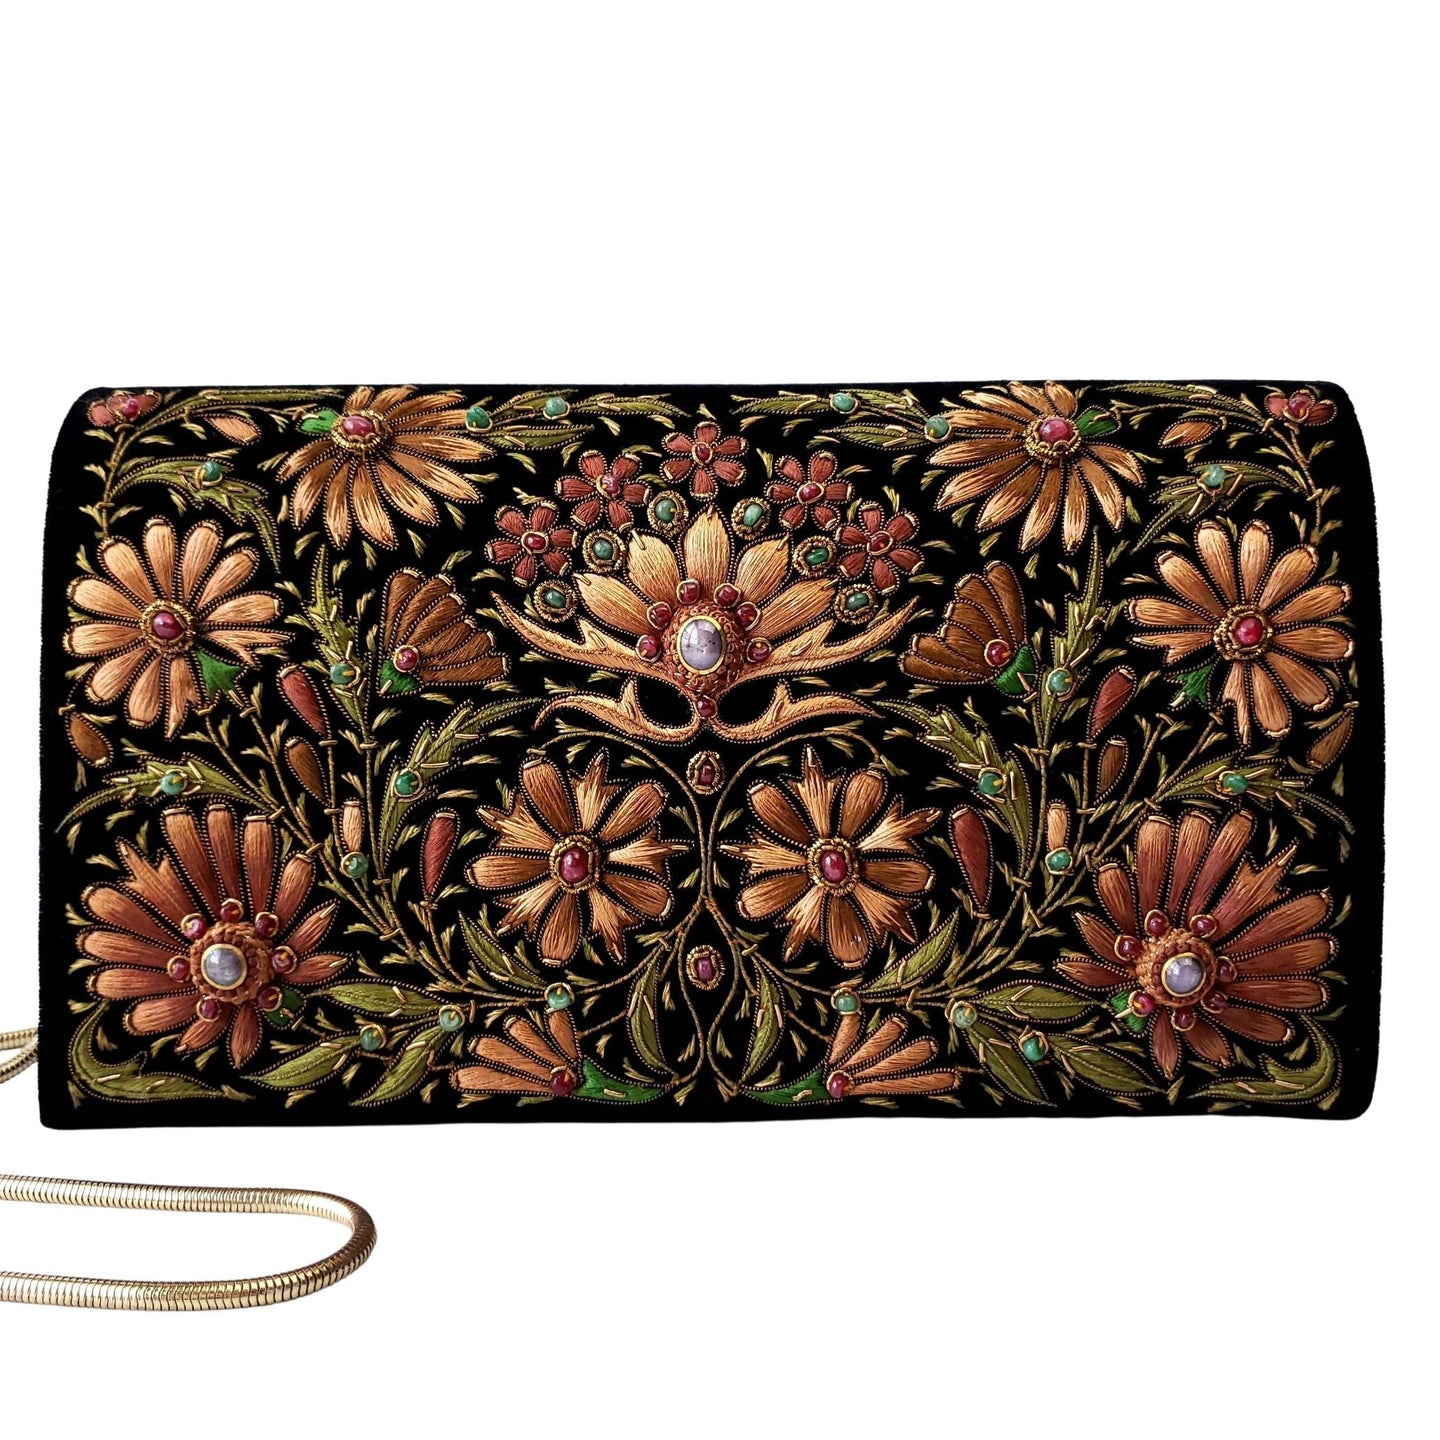 Warm brown embroidered floral handbag with rubies BoutiqueByMariam. 